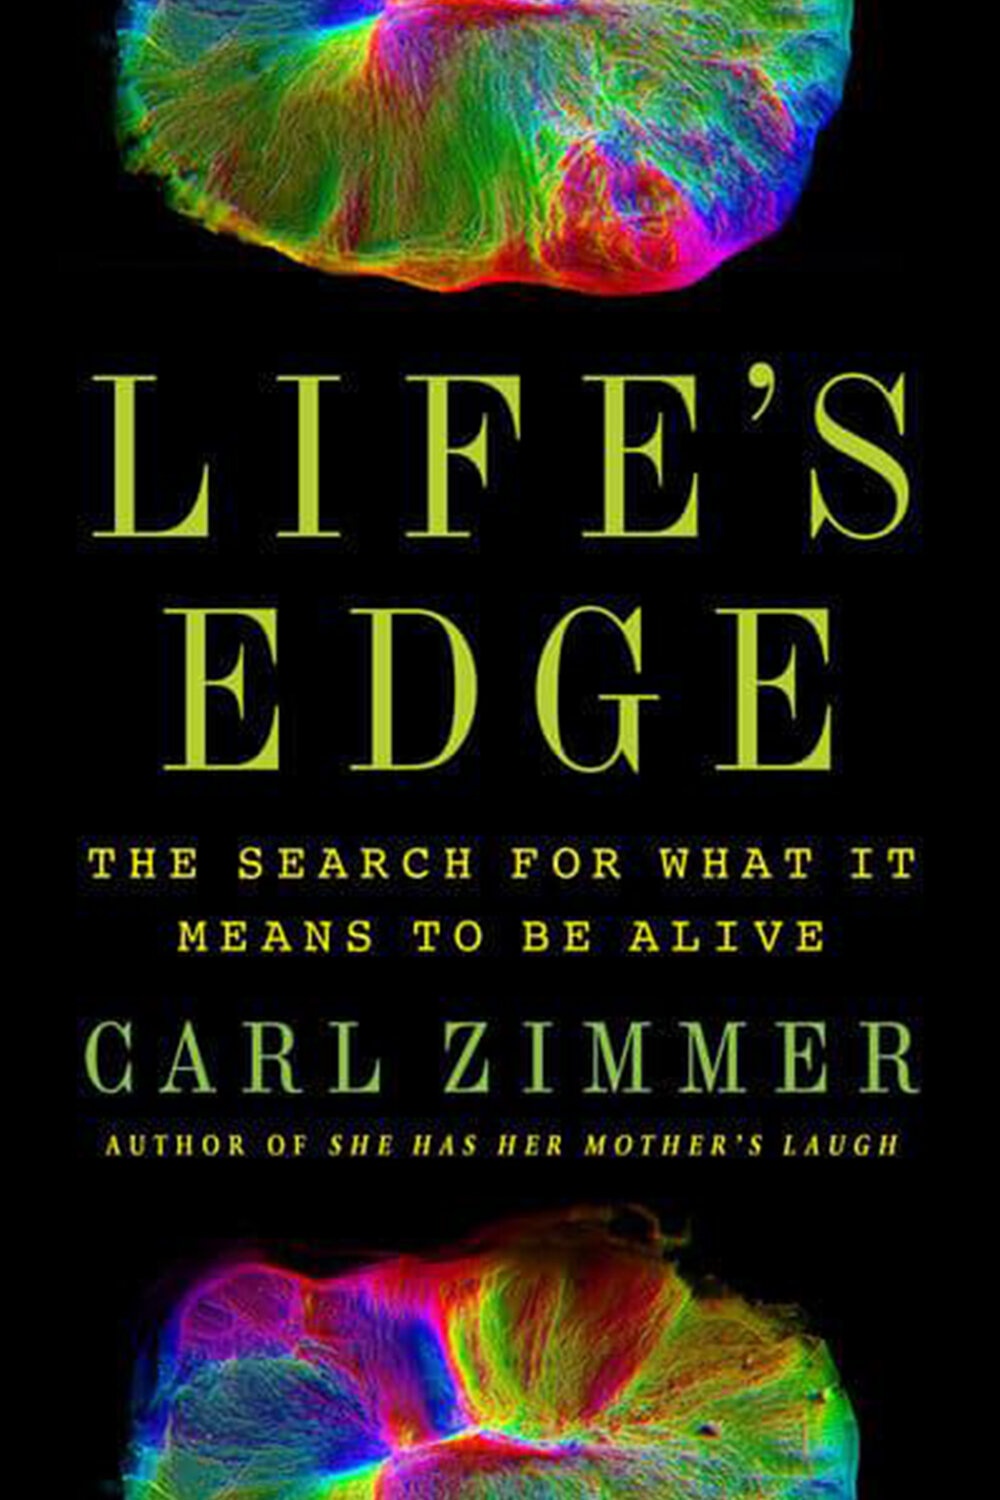 Life's Edge: The Search for What it Means to Be Alive by Carl Zimmer